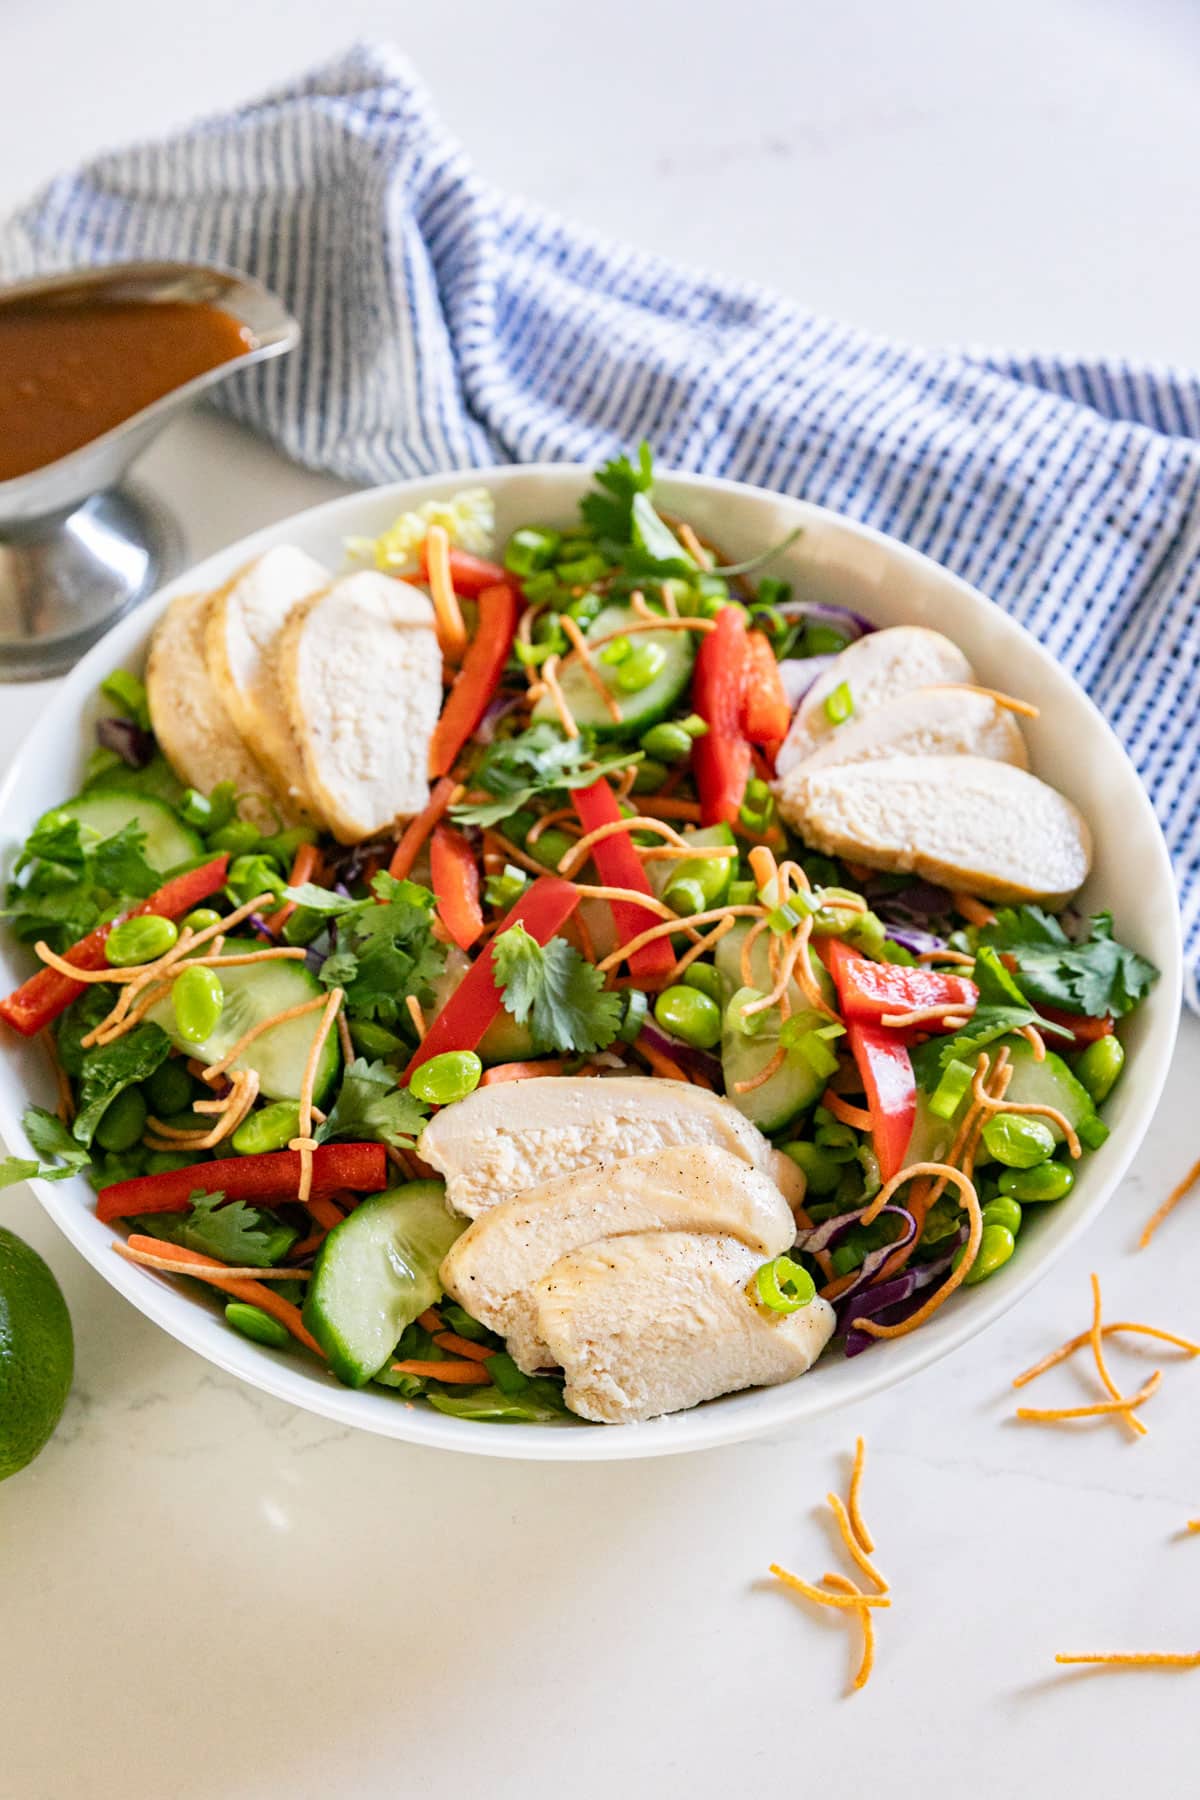 A salad with chicken and rainbow veggies on it in a white bowl with a blue napkin and dressing in the background.